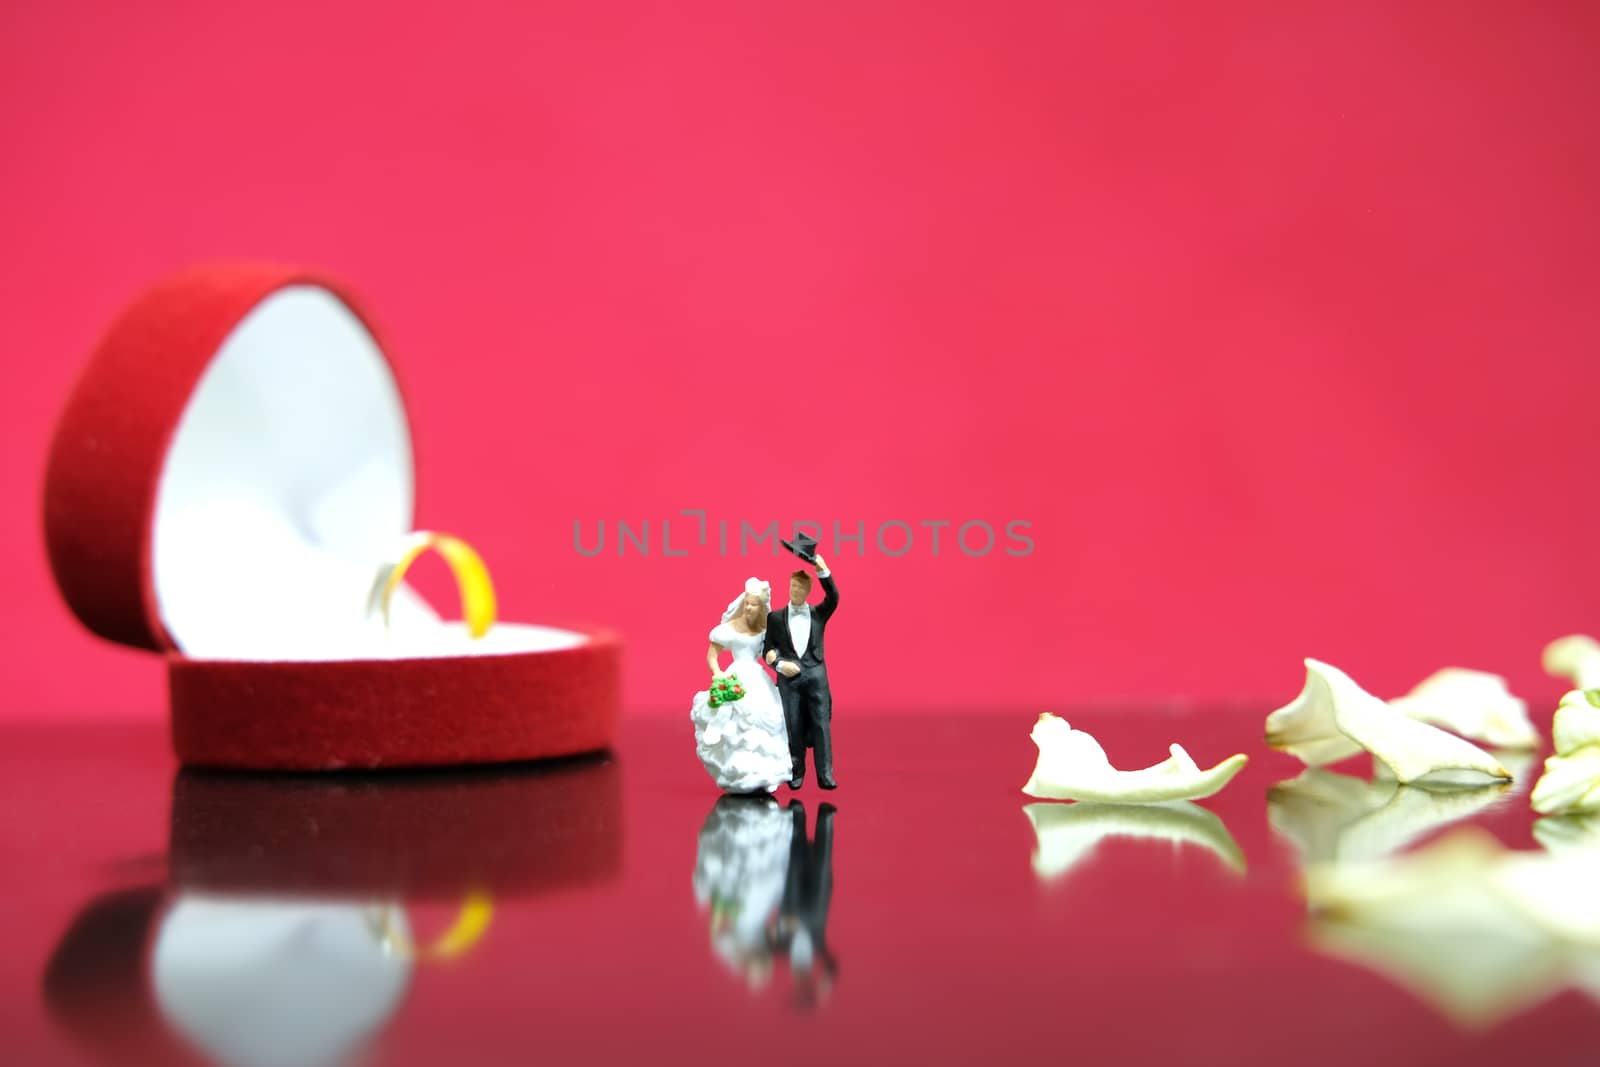 Miniature photography - garden flower outdoor wedding concept, bride and groom walking on shiny floor with white rose petal, including red heart shape ring box